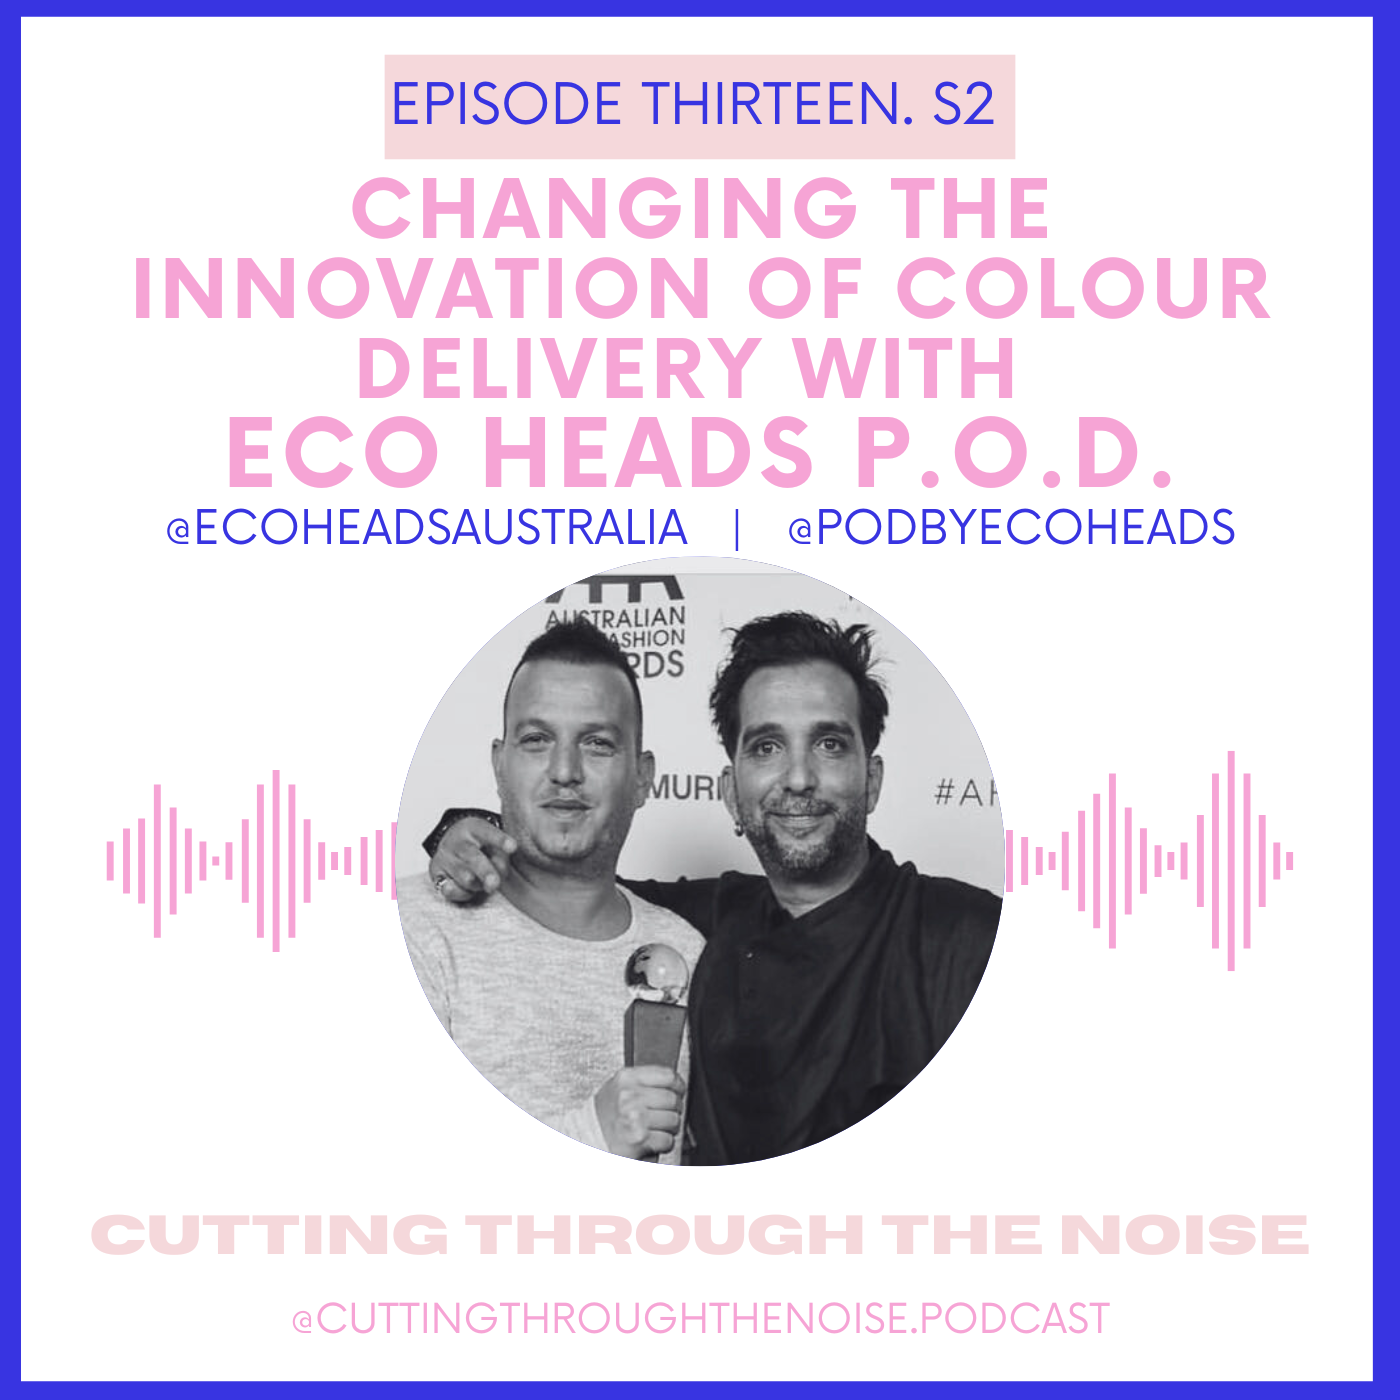 Episode Thirteen. S2: Changing the innovation of colour delivery with Eco Heads P.O.D.